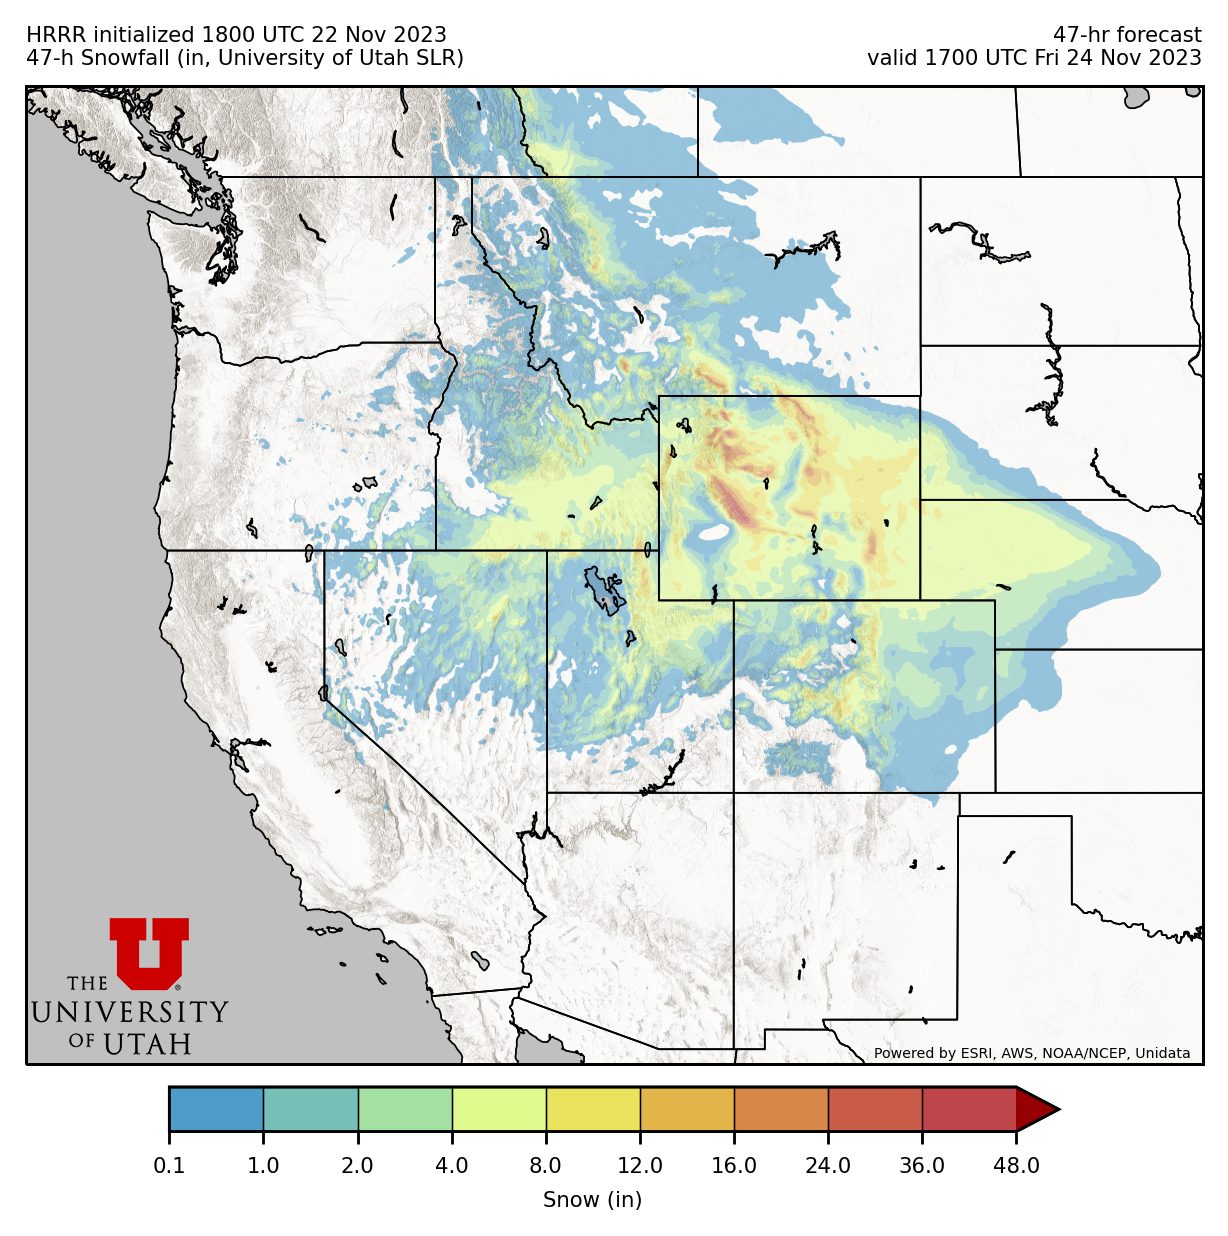 map of predicted snowfall in the western united states.